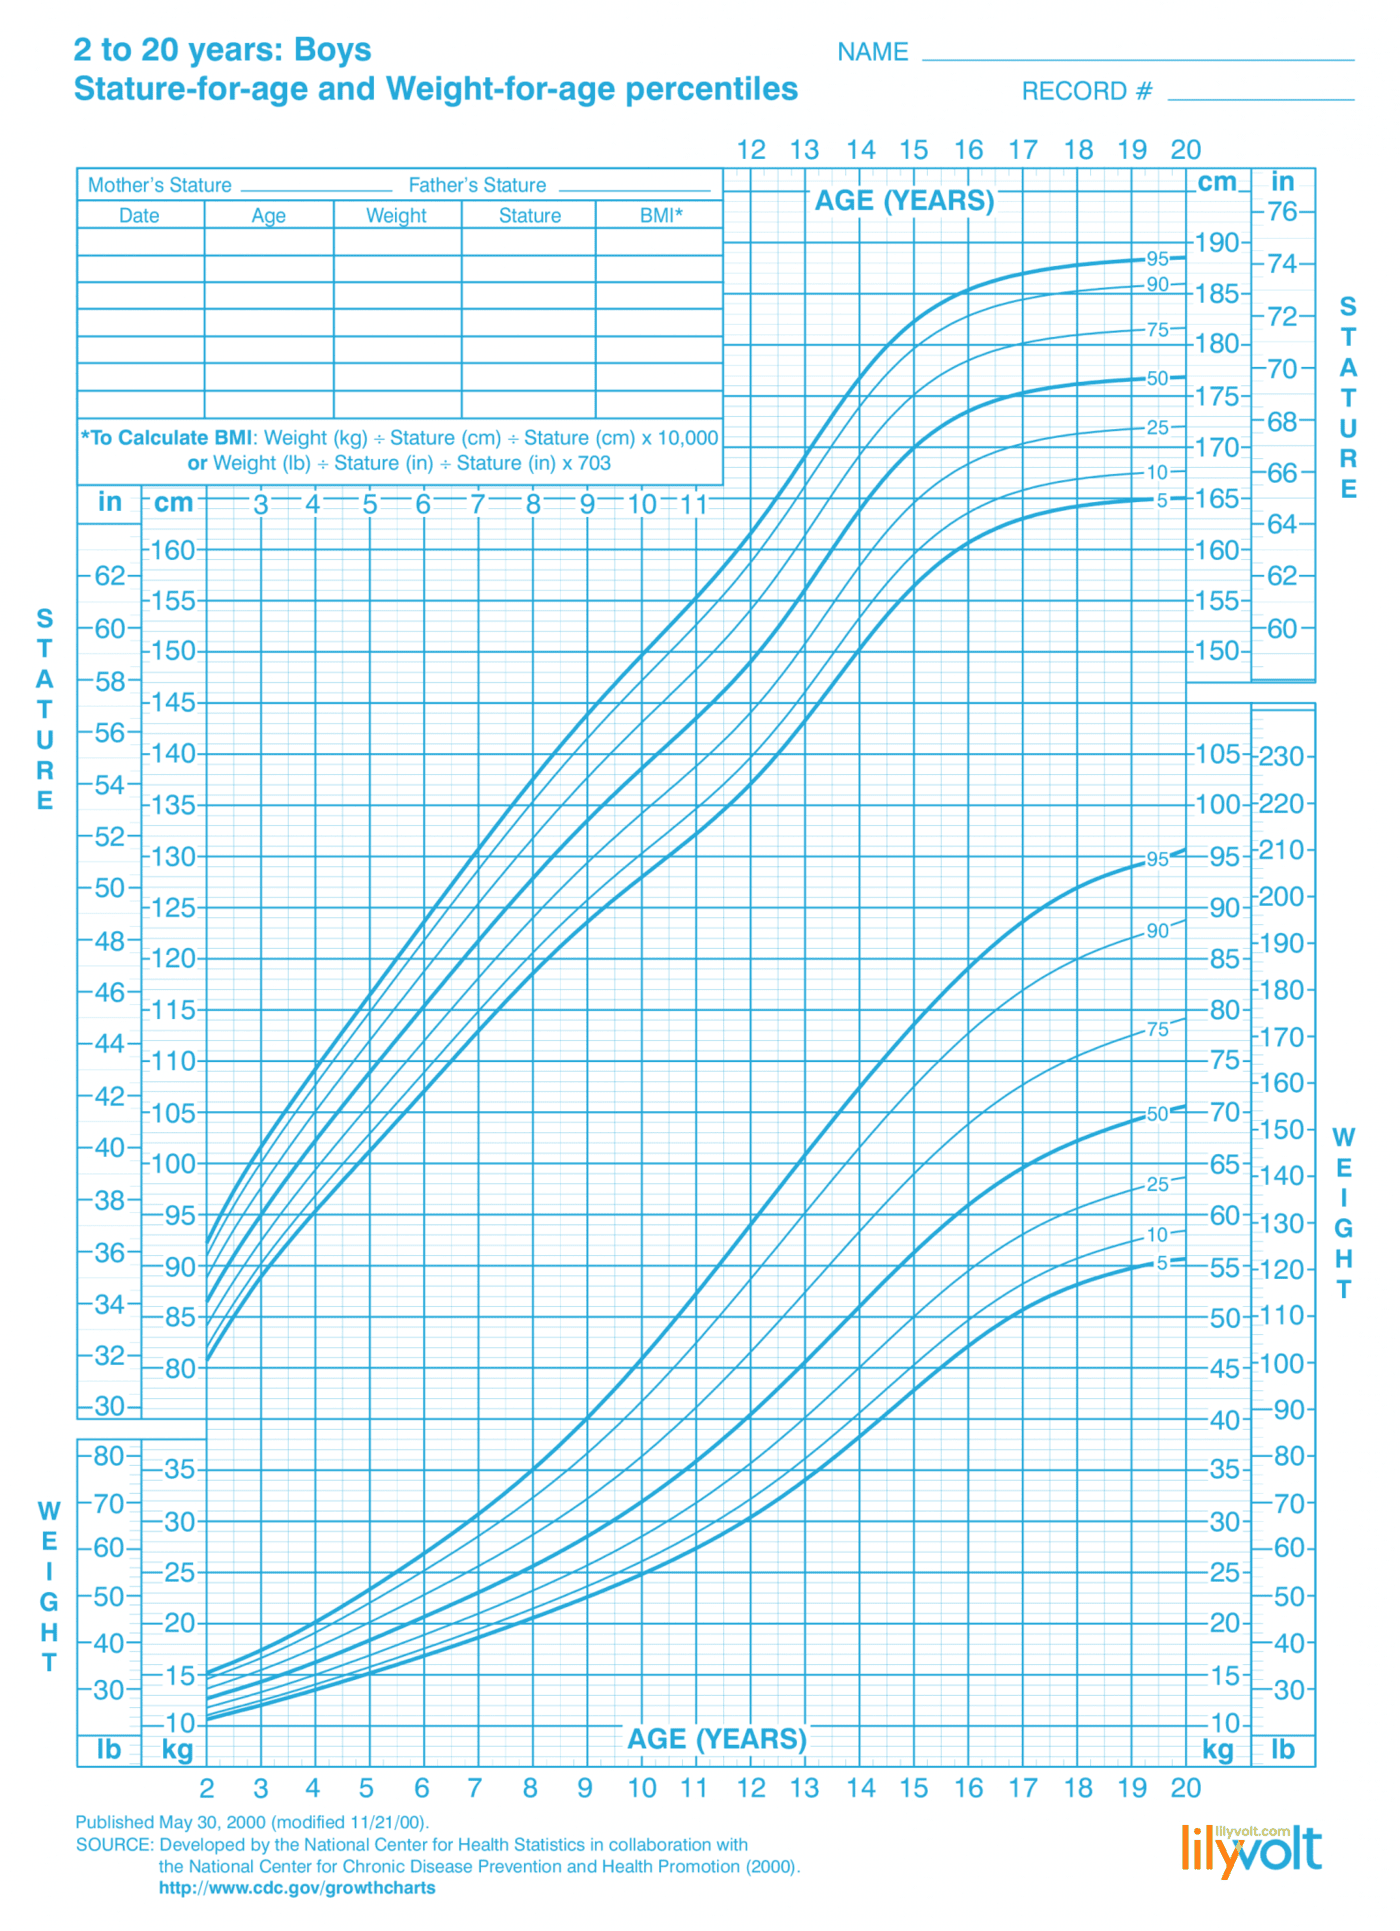 Boys growth chart for 2 to 20 years CDC - From Lilyvolt